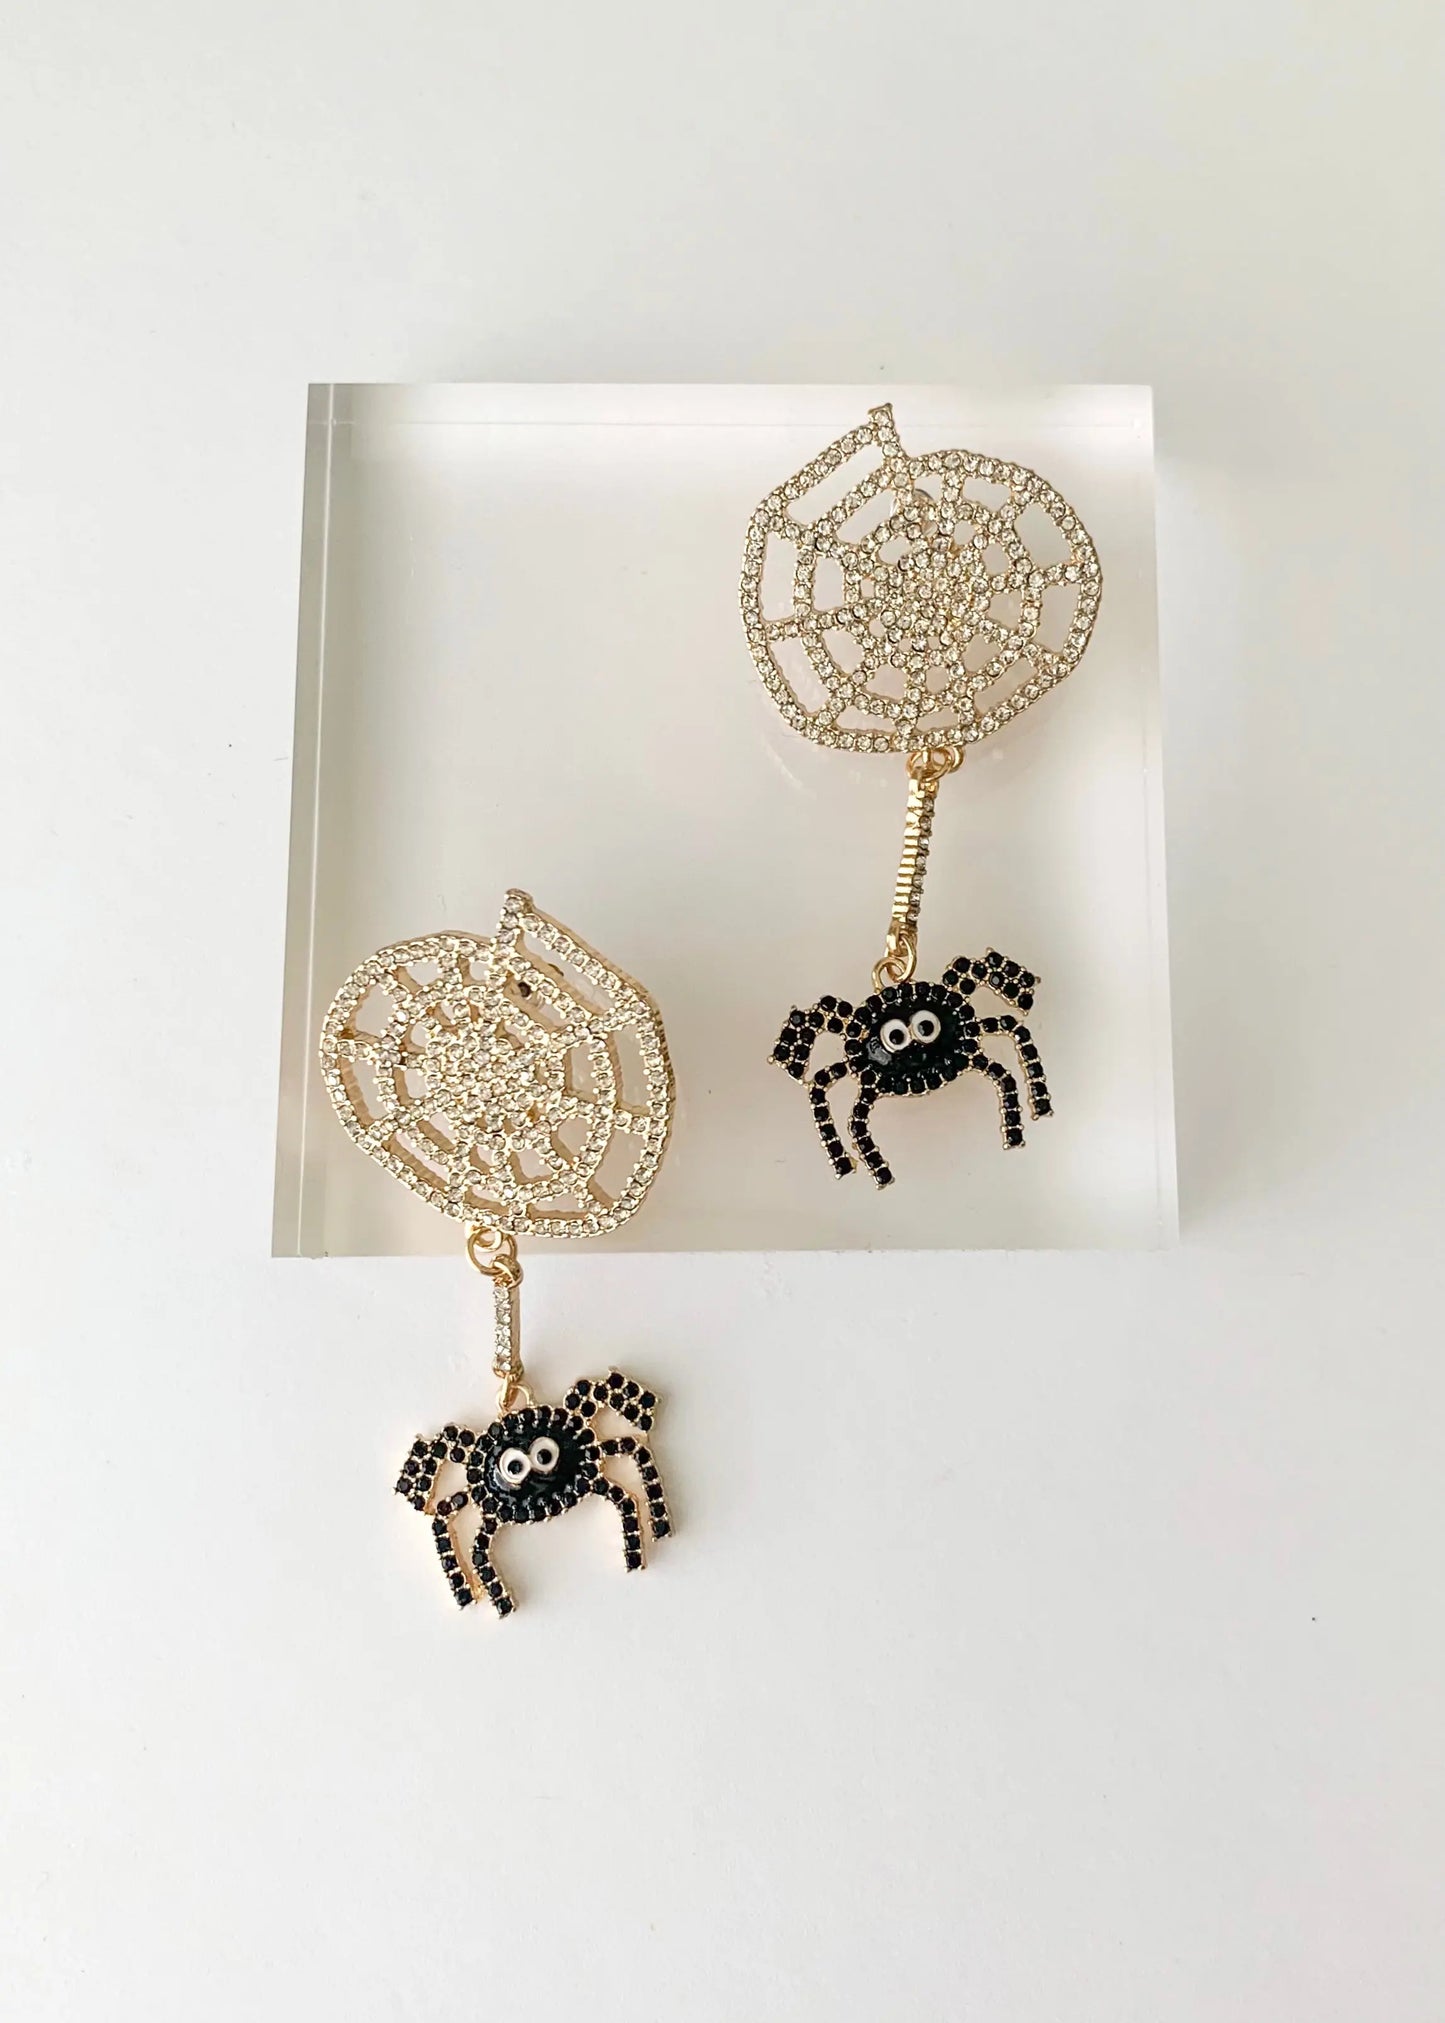 Crystal Spider Web Halloween Drop Earrings by The Tiny Details